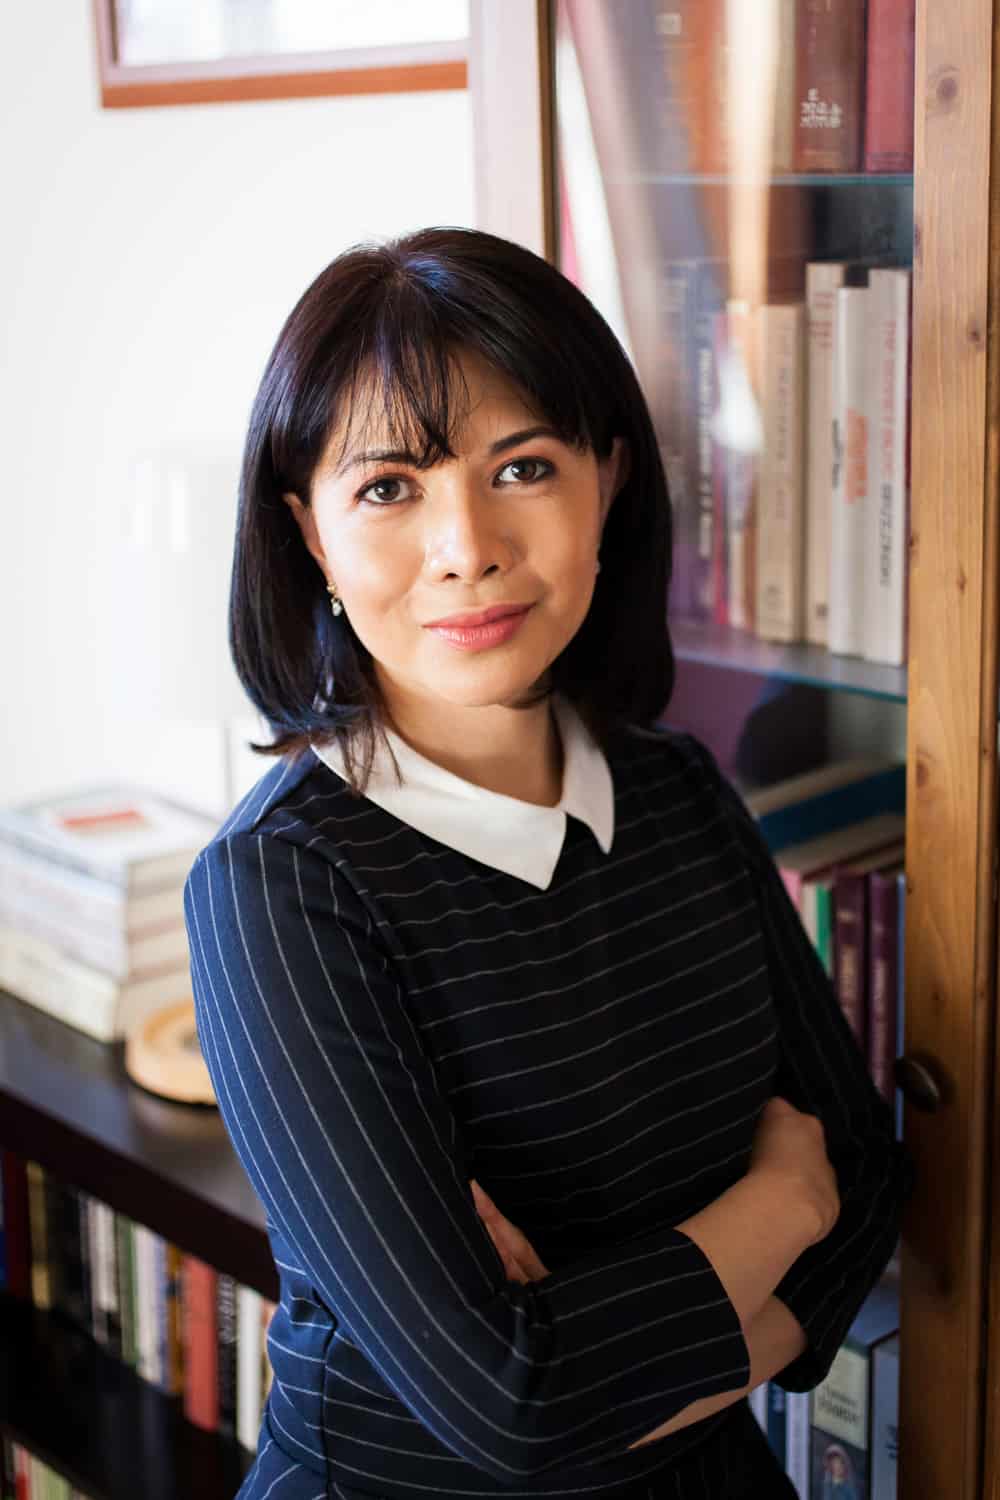 Woman leaning against bookshelf wearing pinstripe blouse for an article on online portrait tips